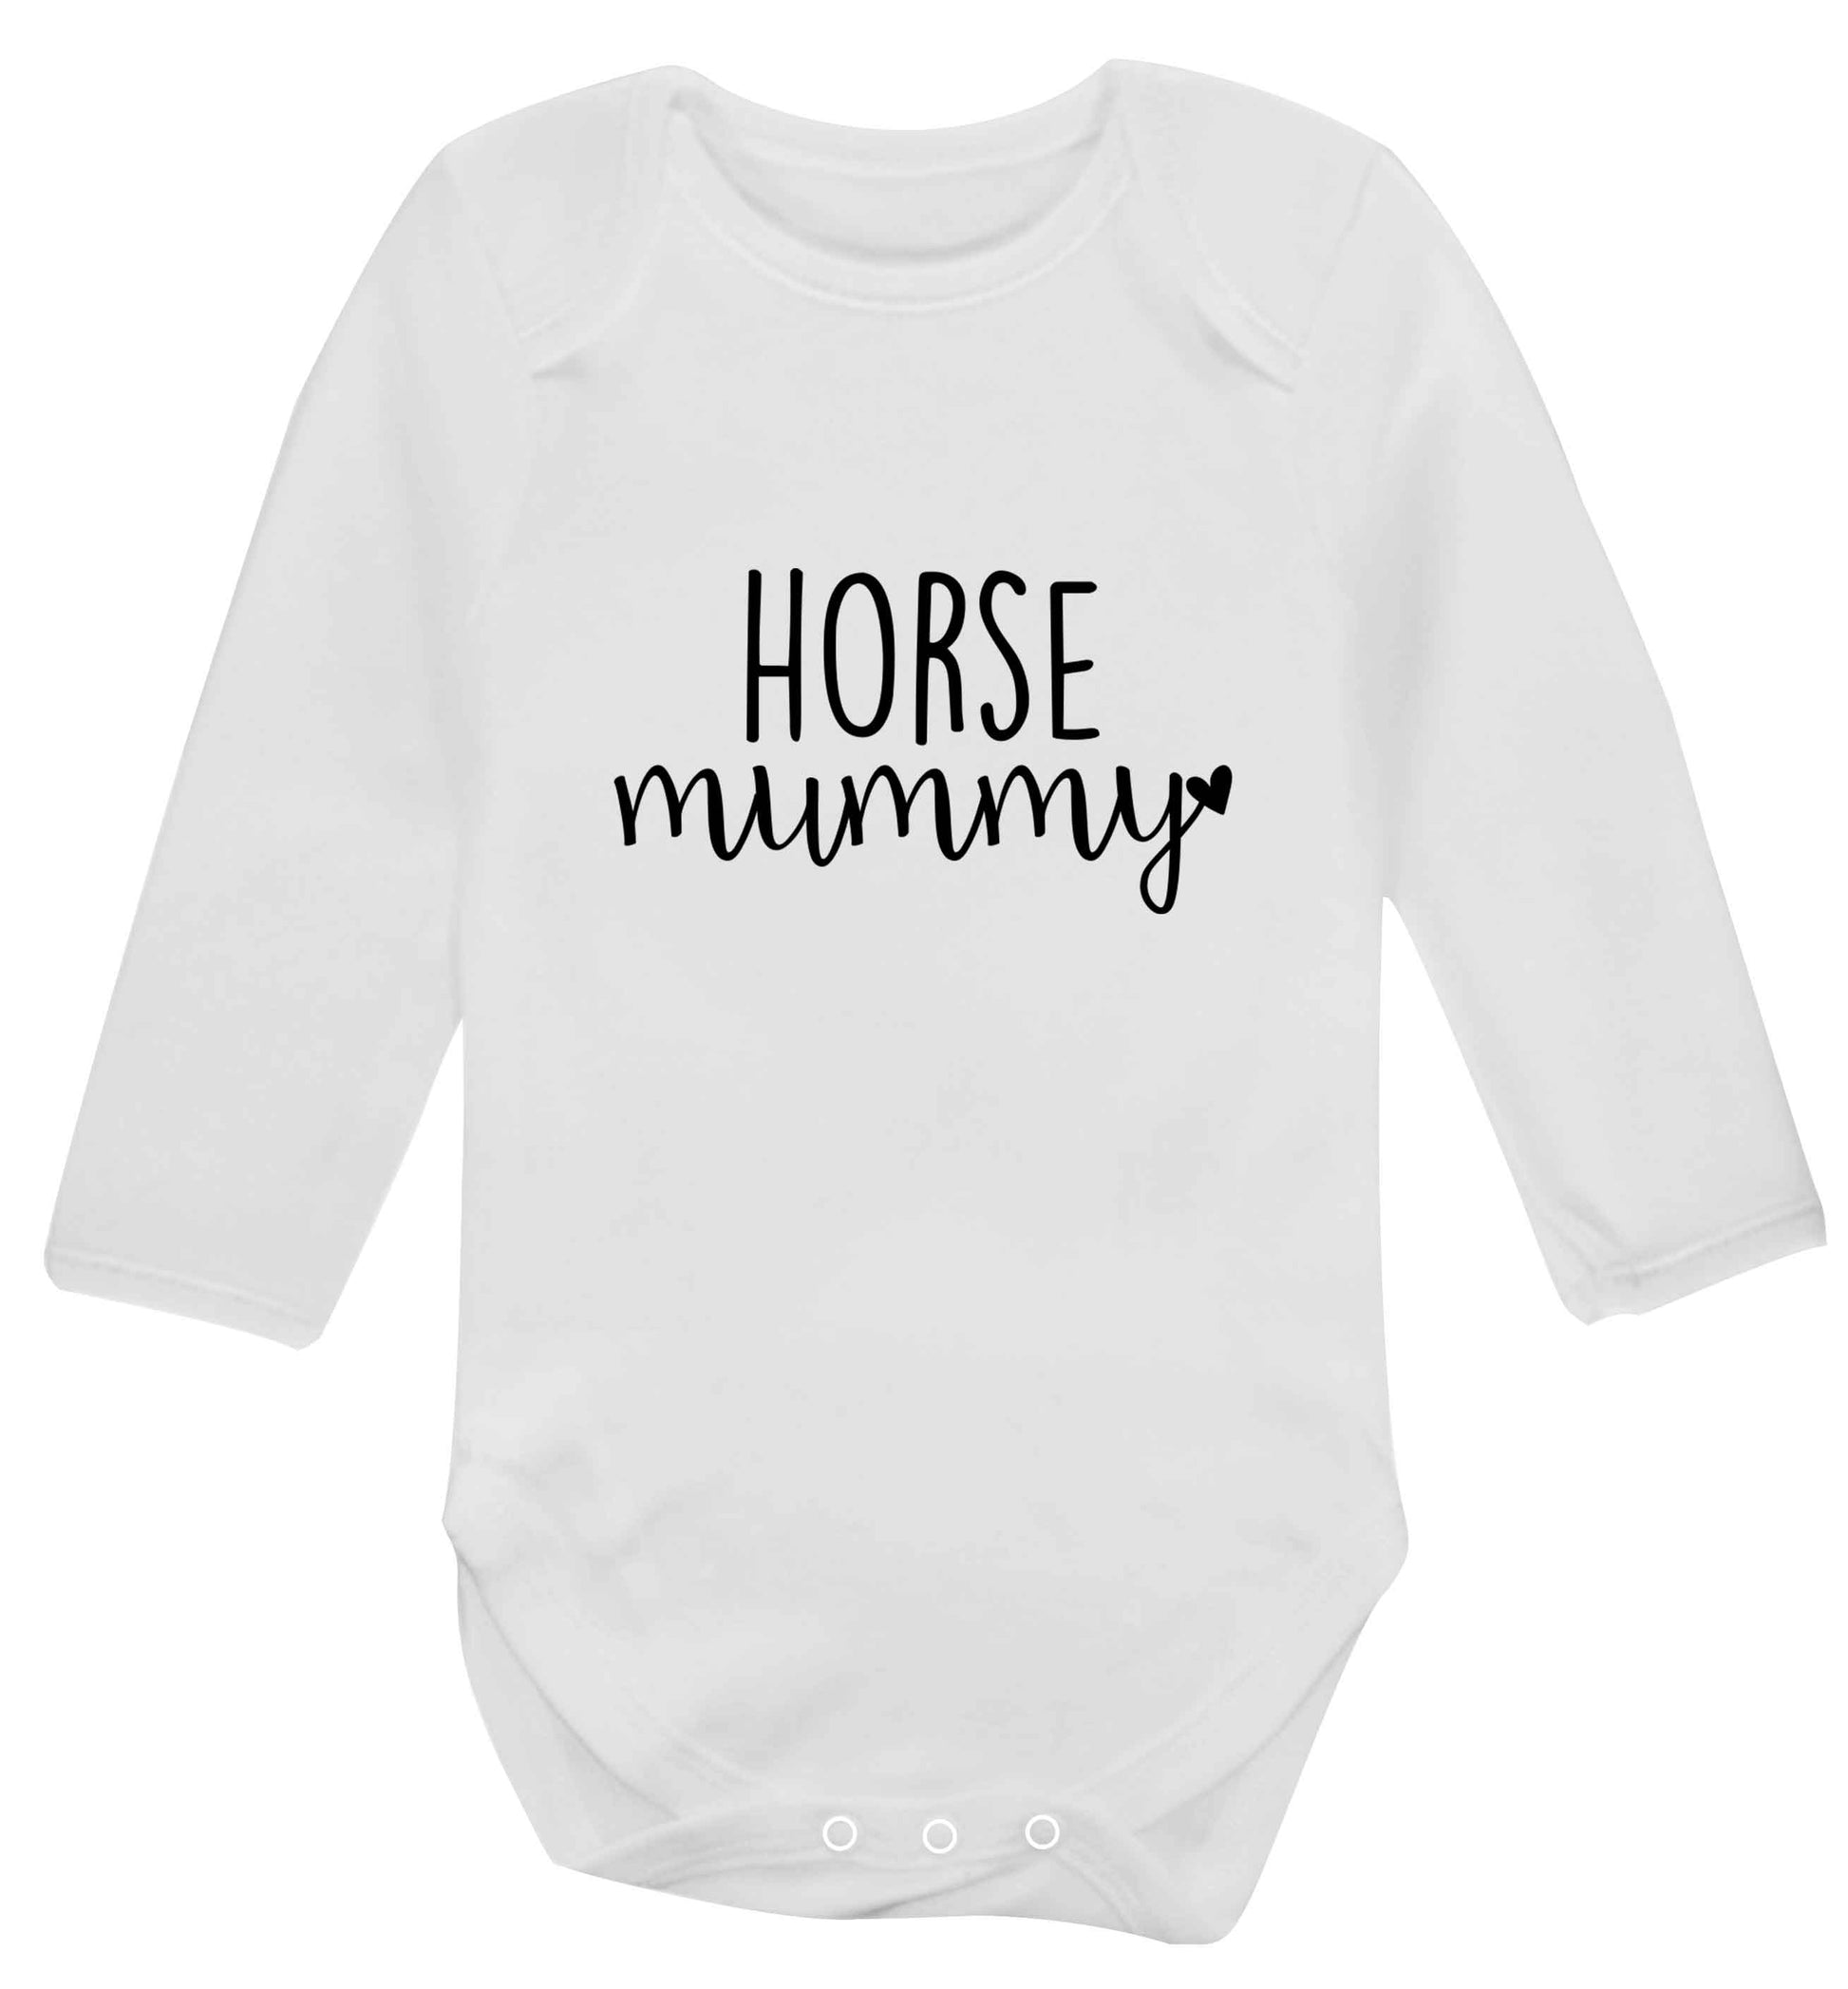 Horse mummy baby vest long sleeved white 6-12 months